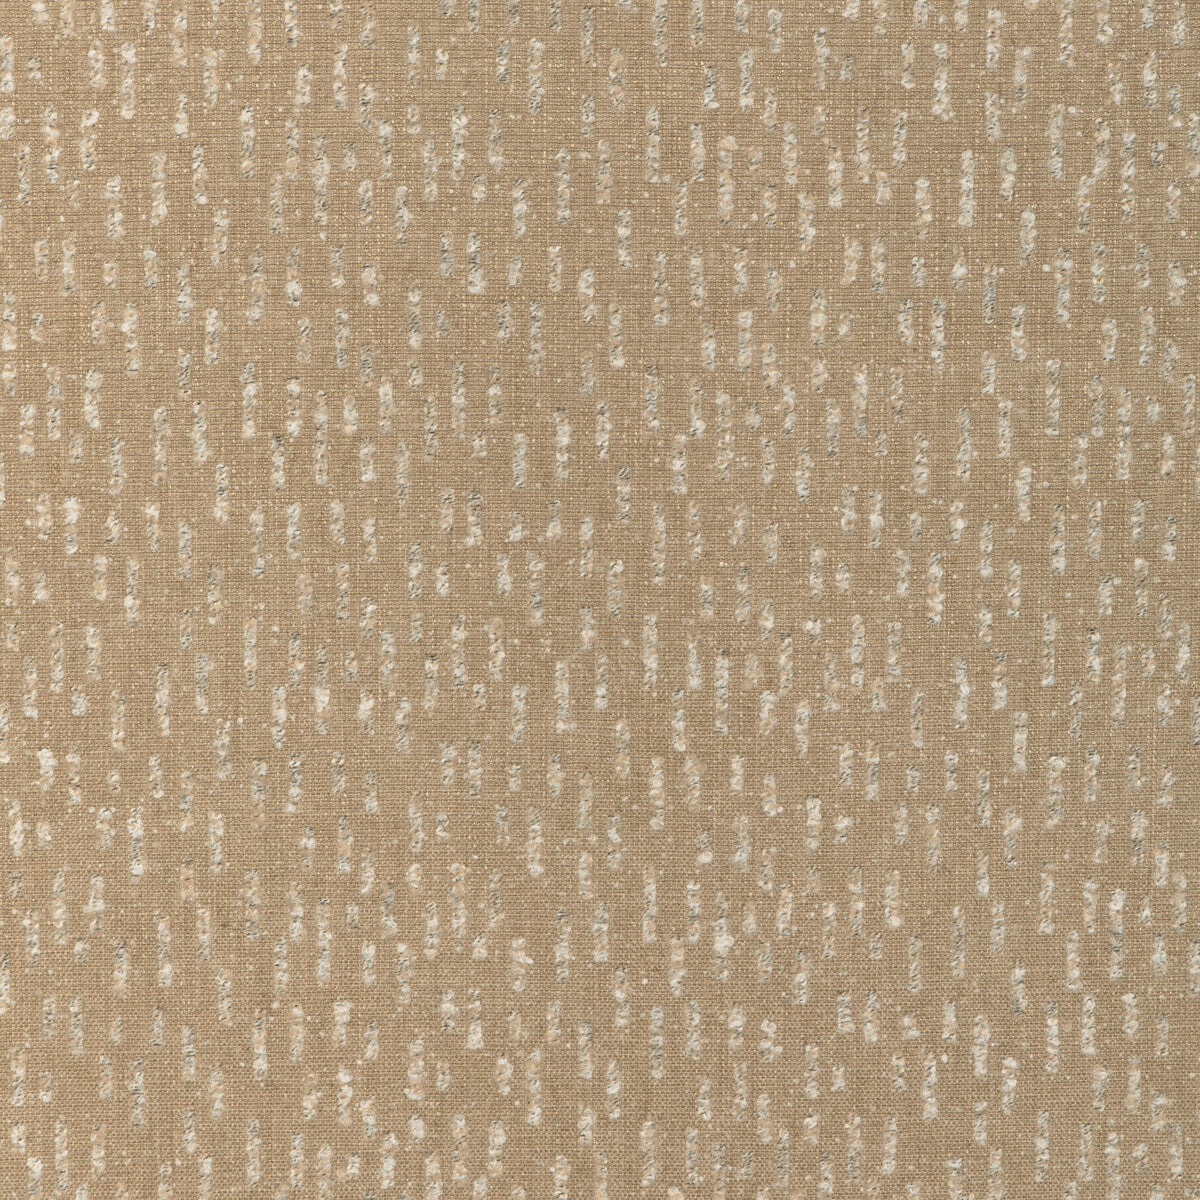 Slew fabric in taupe color - pattern GWF-3794.106.0 - by Lee Jofa Modern in the Kelly Wearstler VIII collection